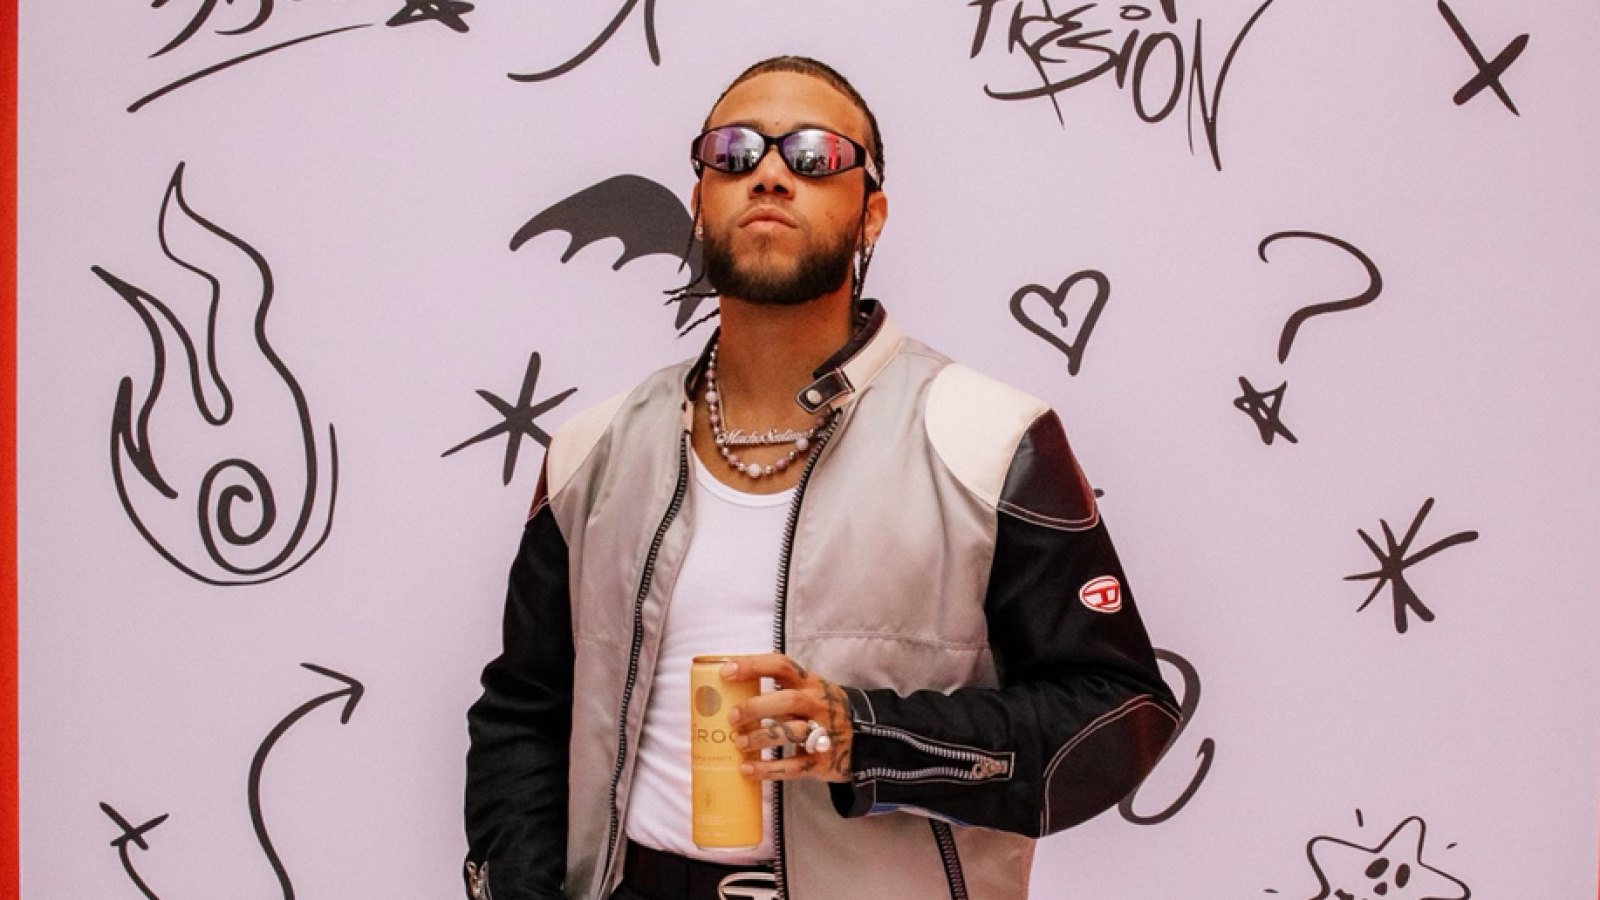 Get To Know Puerto Rican Rapper Jhayco